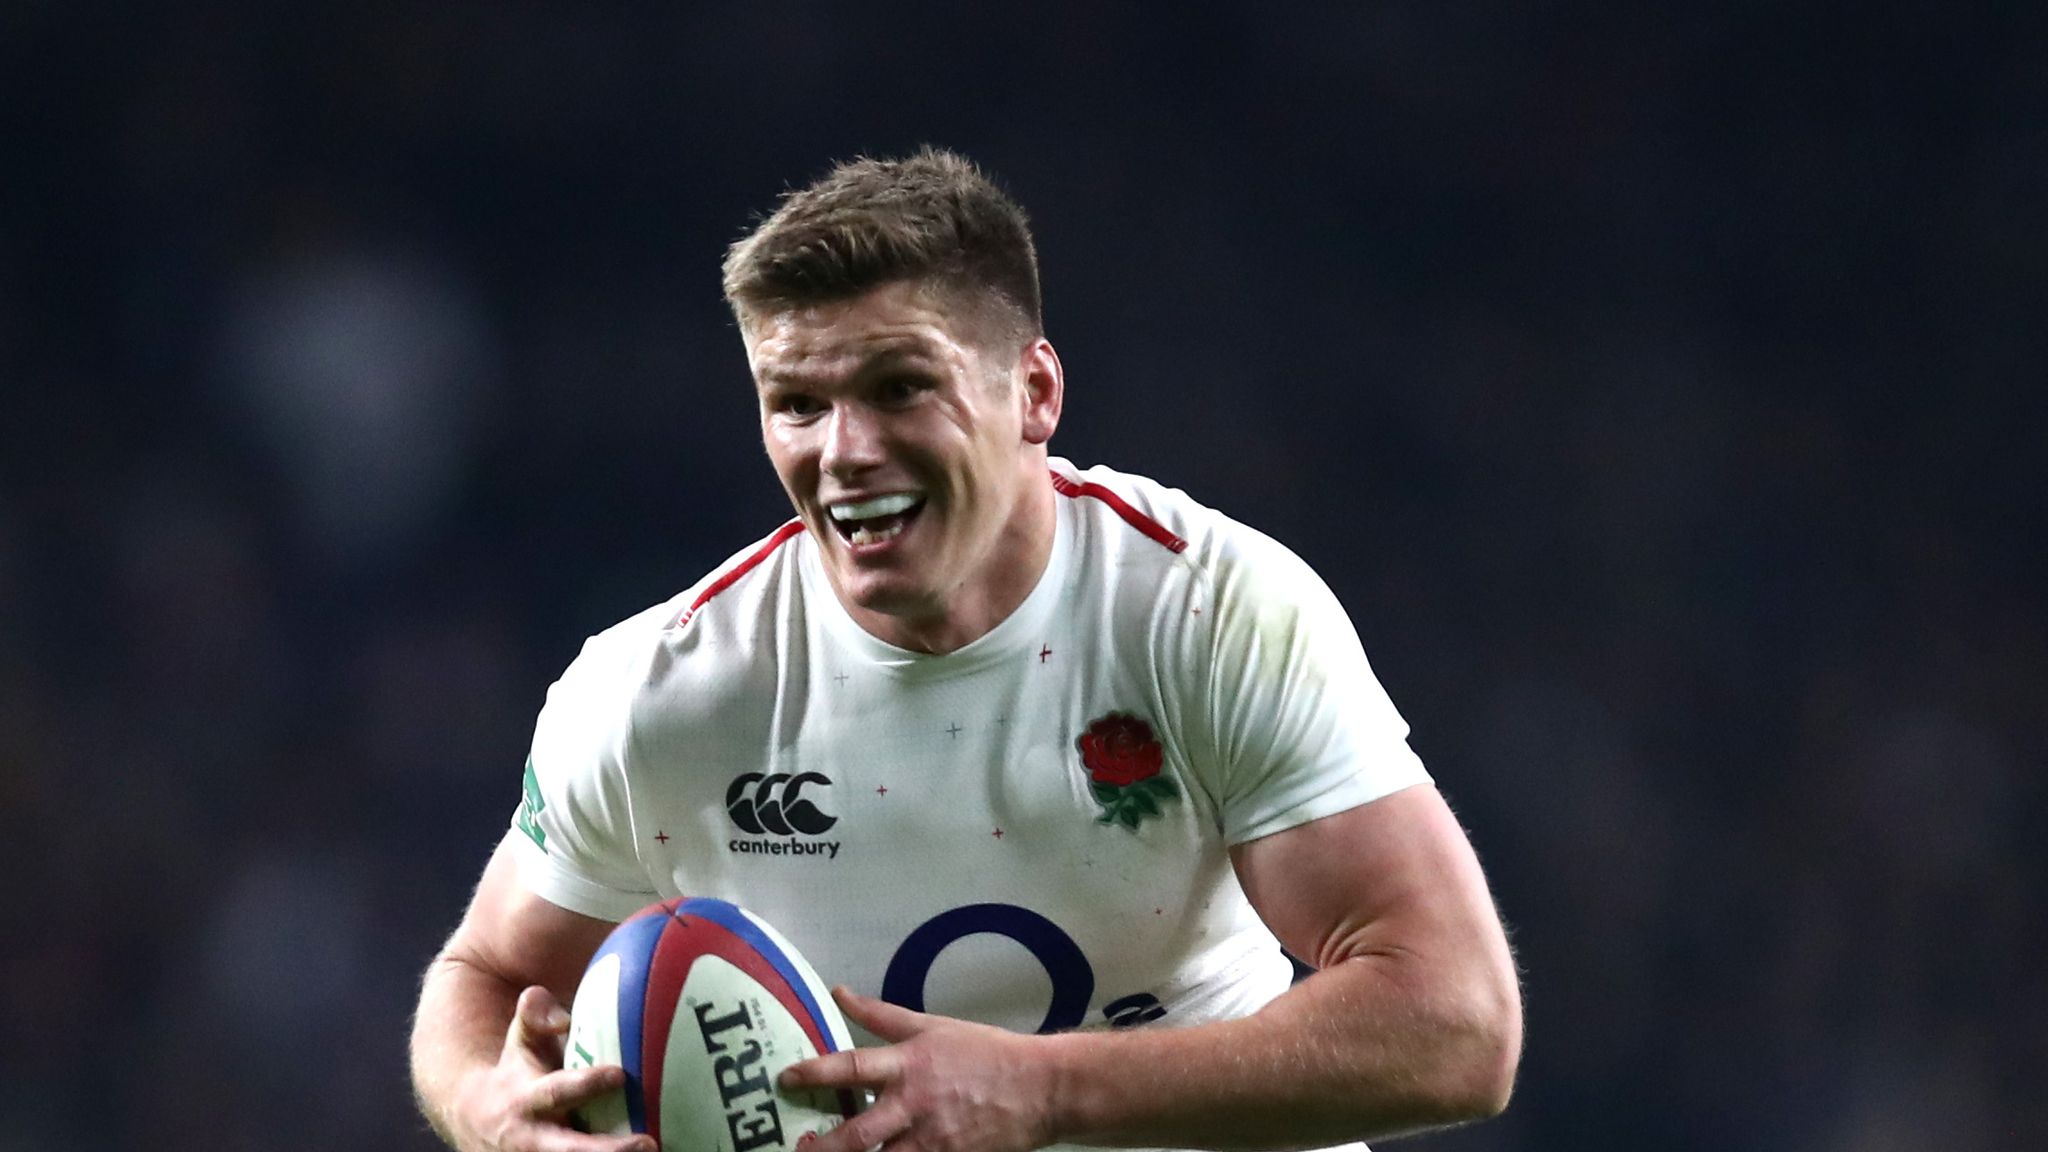 Owen Farrell a doubt for England's Six Nations opener in Ireland. Rugby Union News